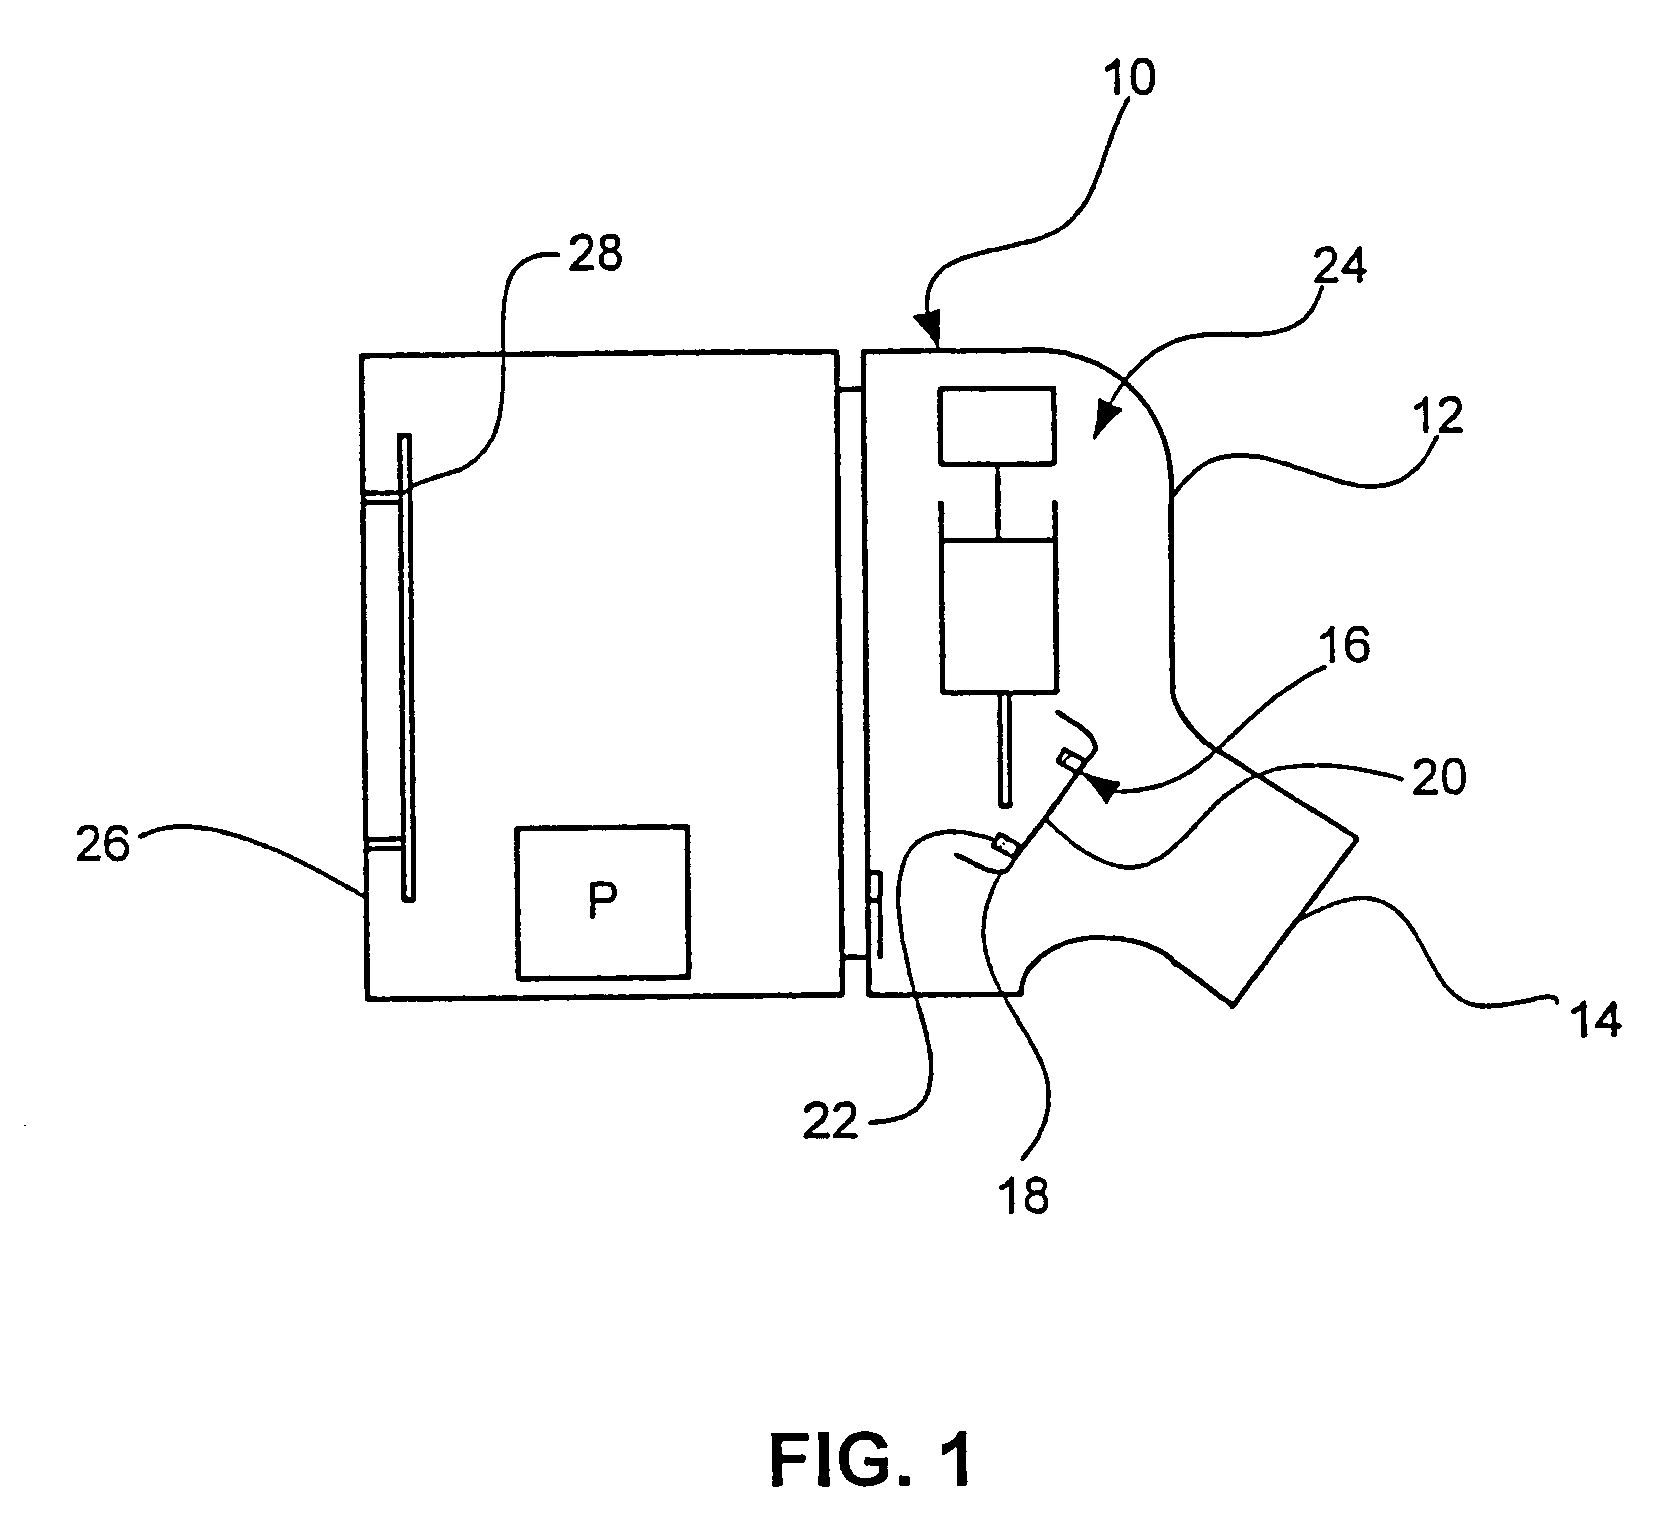 Systems and methods for controlling fluid feed to an aerosol generator